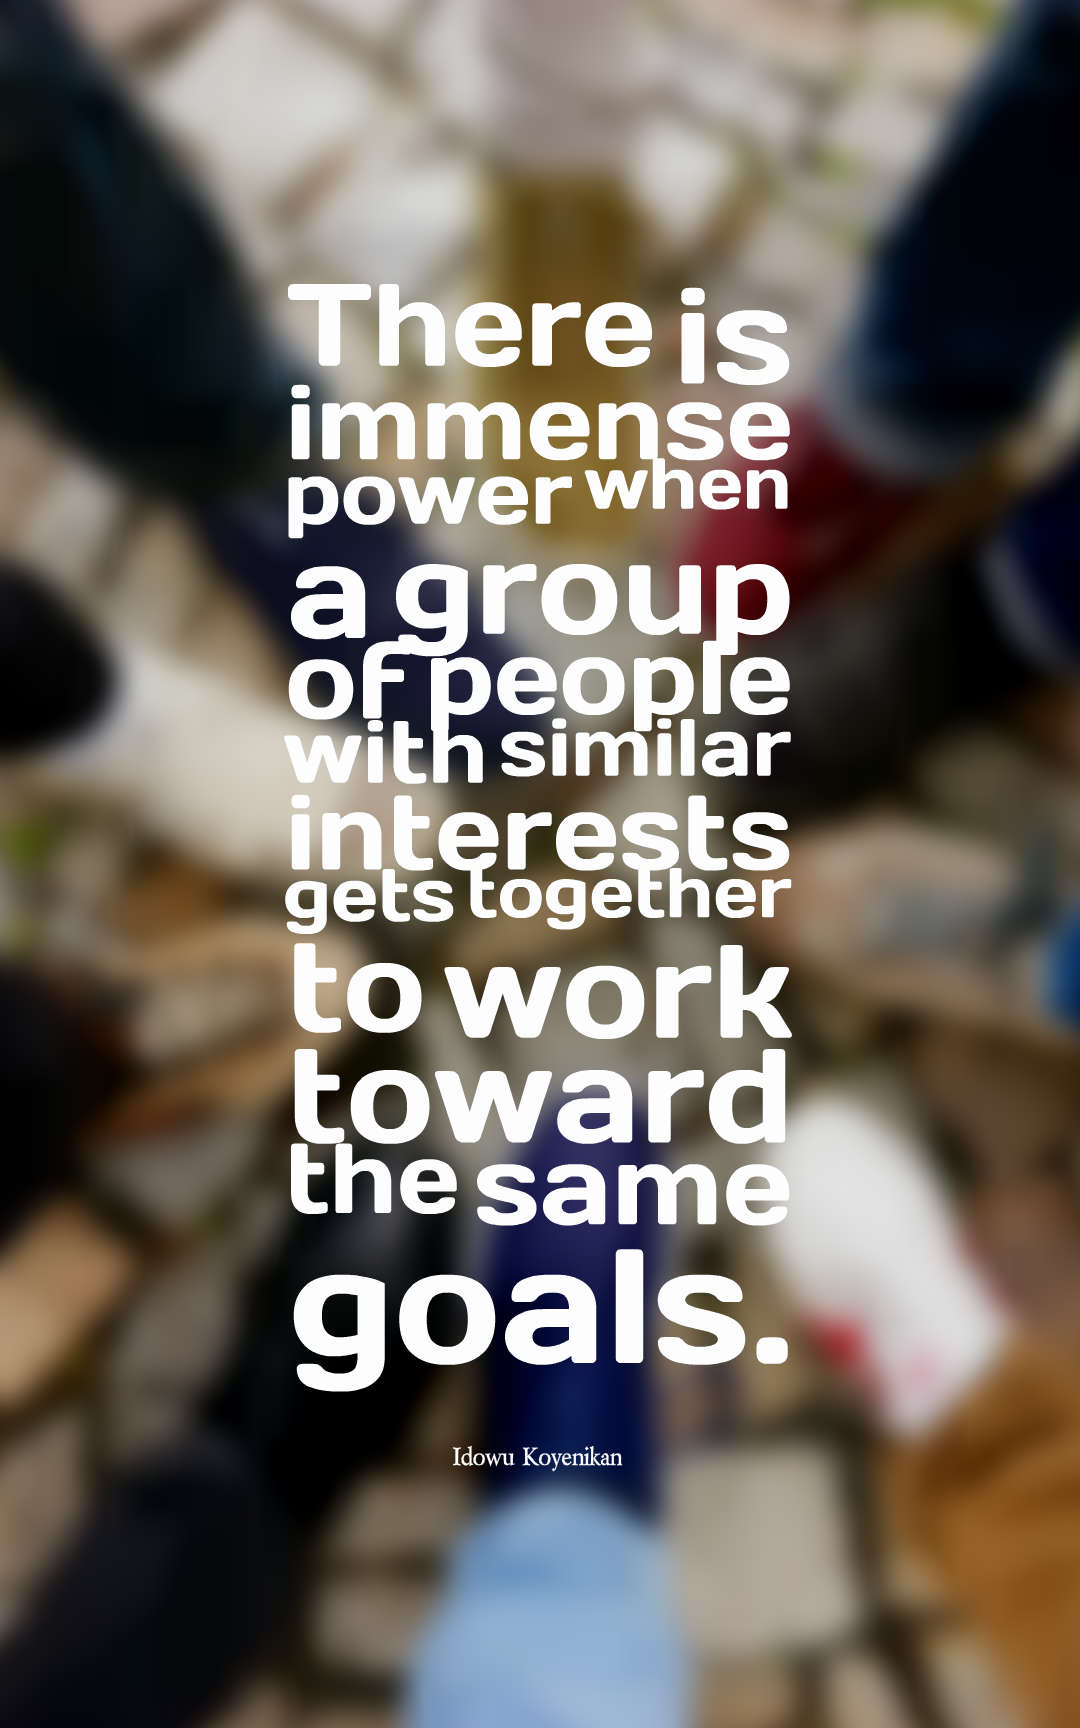 There is immense power when a group of people with similar interests gets together to work toward the same goals.